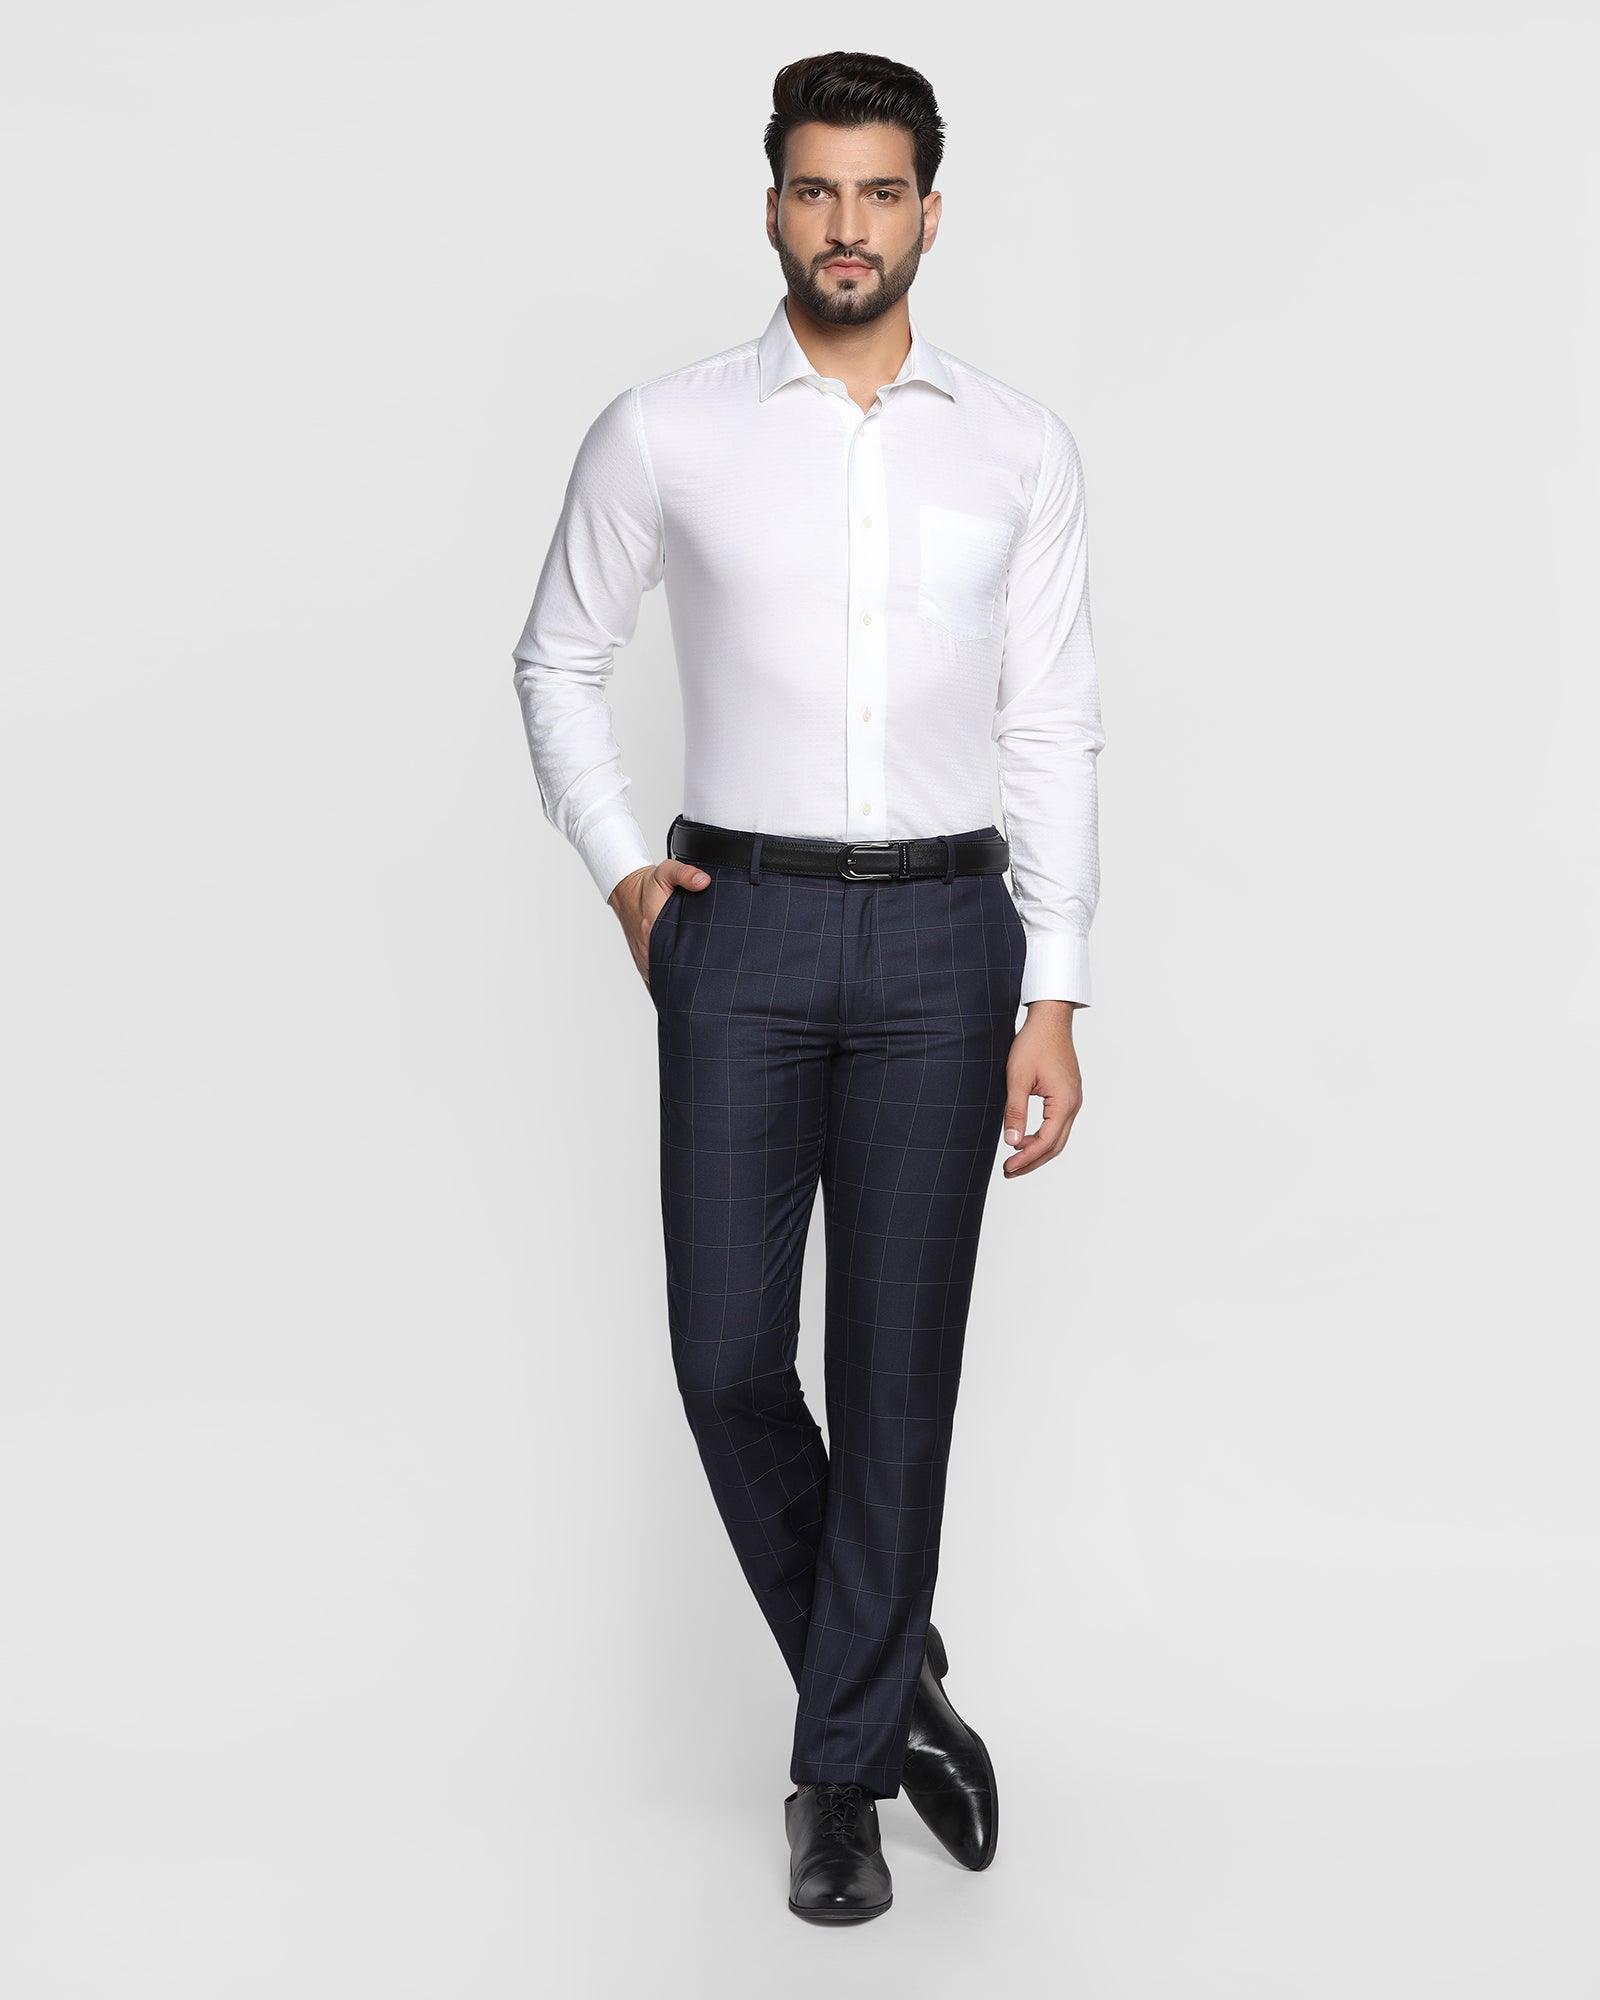 Buy MOSS Tailored Fit Navy Black Check Suit: Trousers from the Next UK  online shop